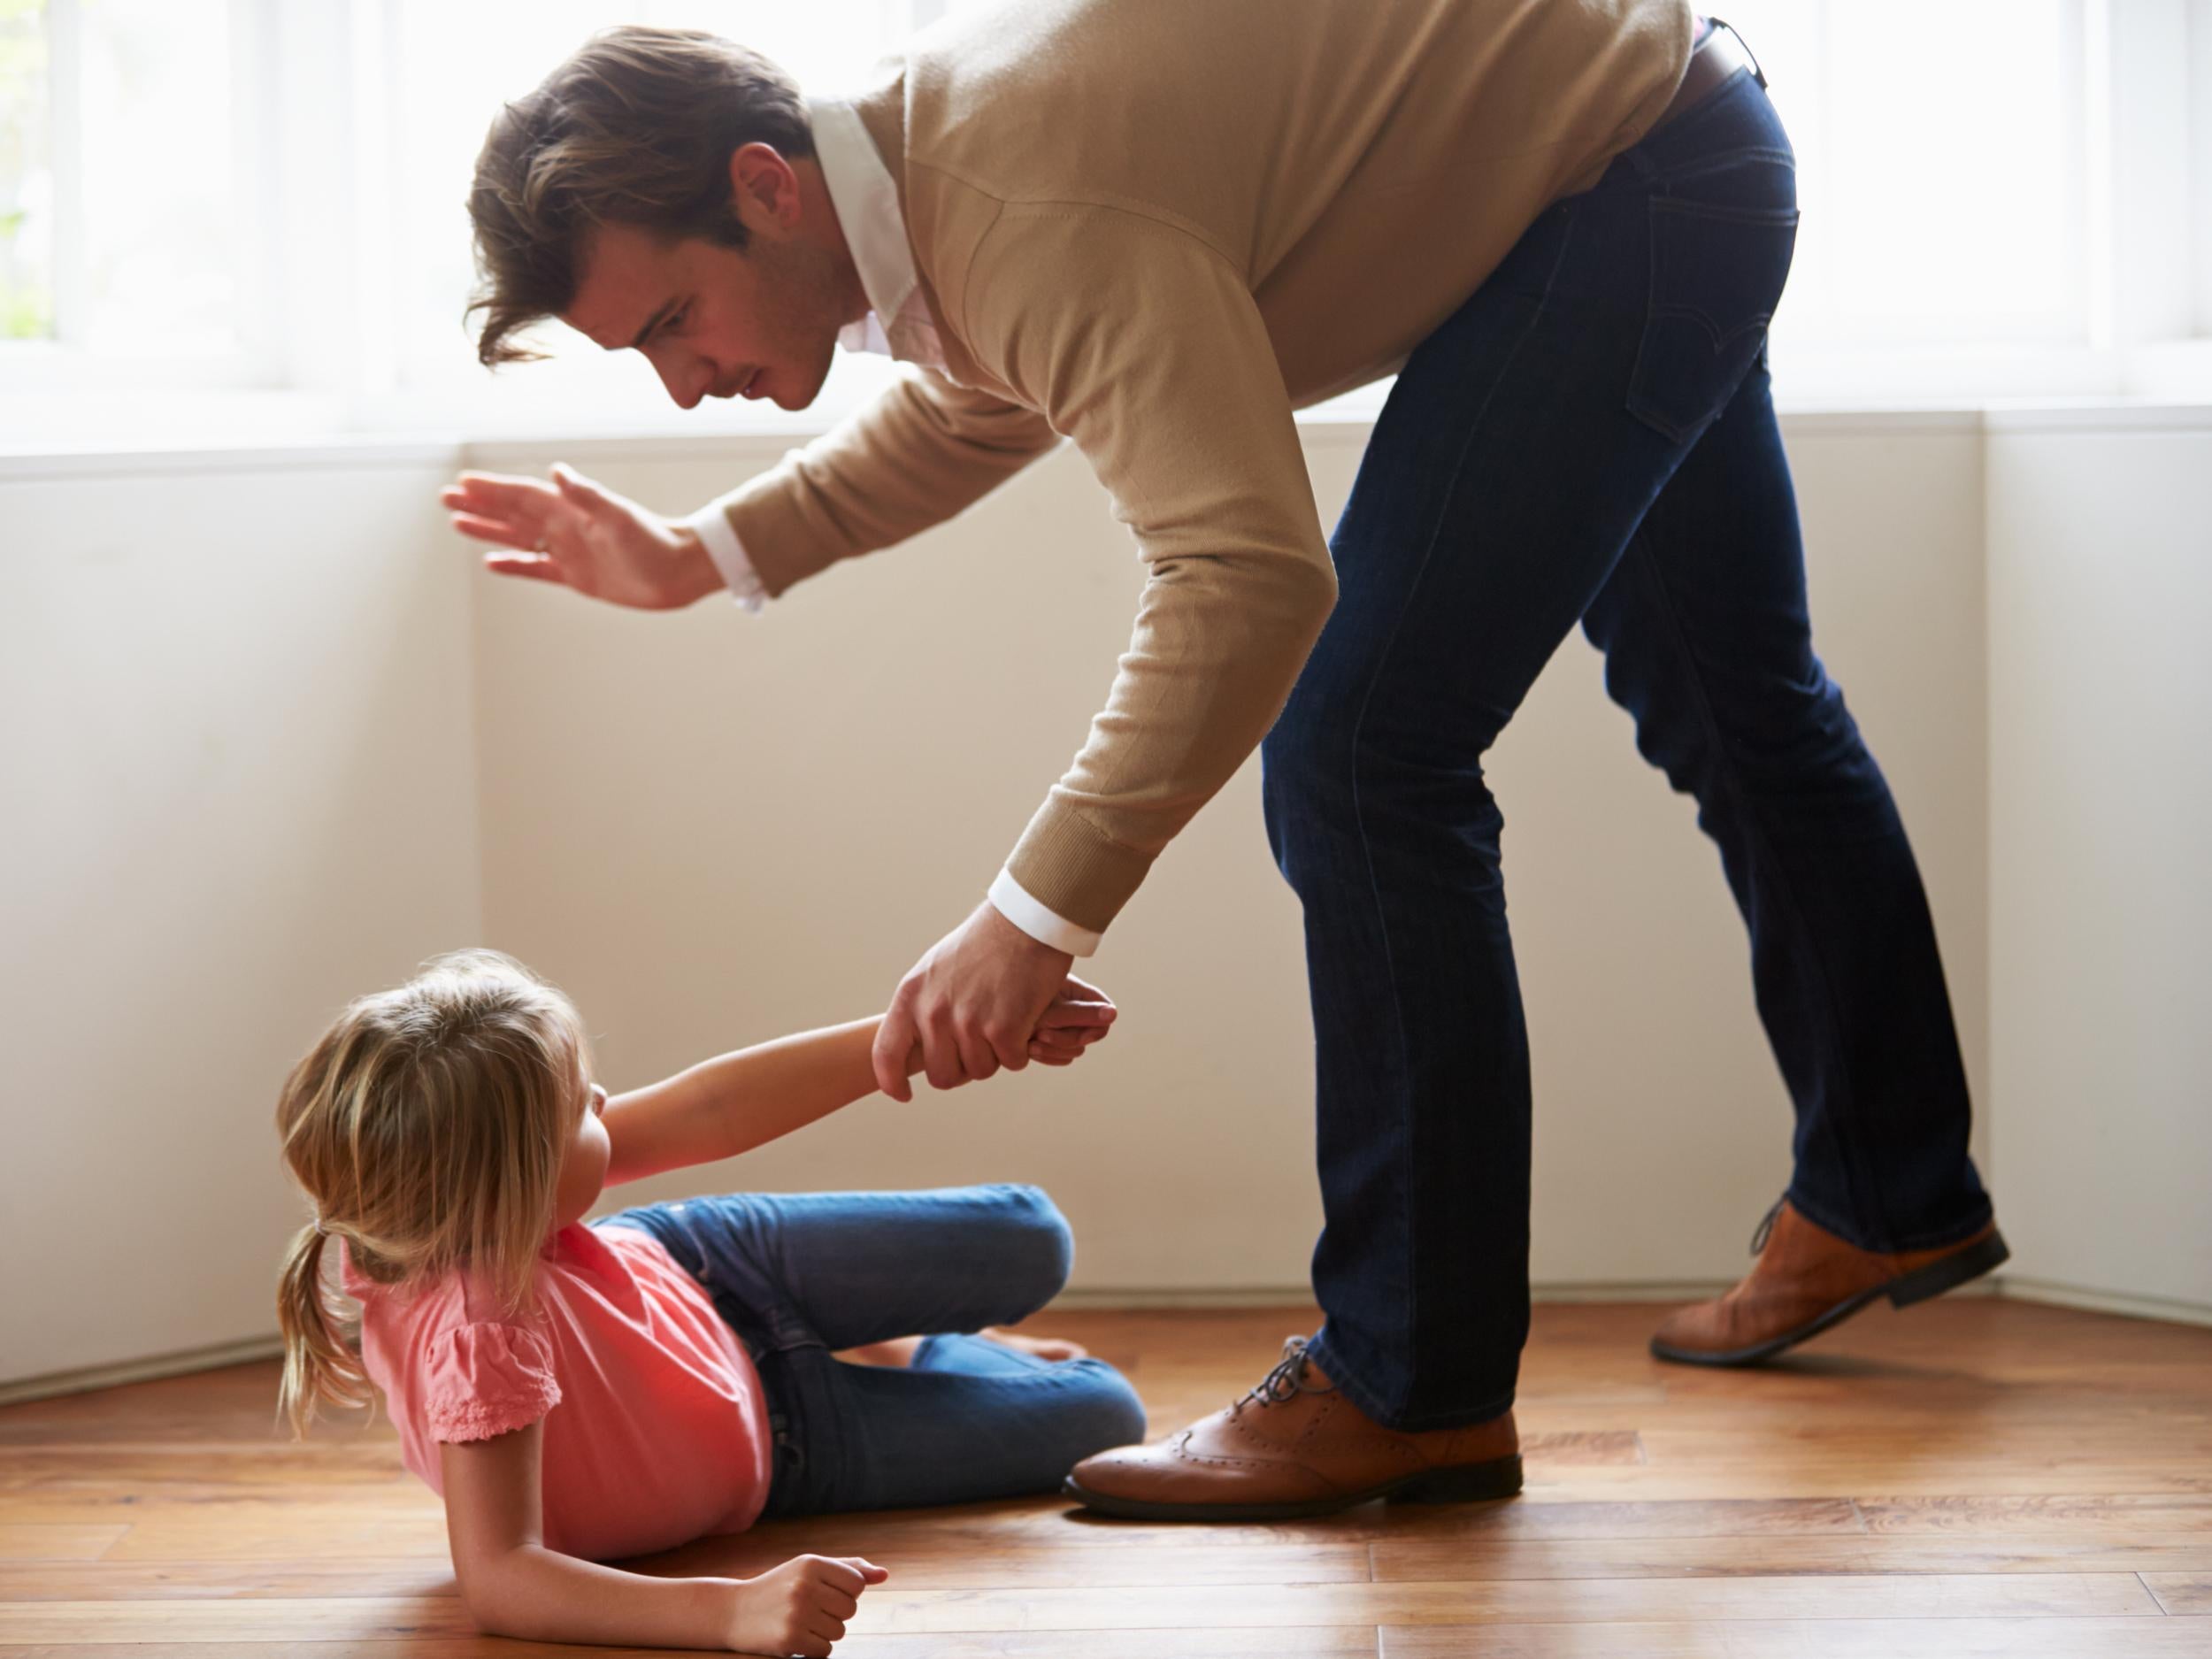 Politicians overwhelmingly backed the ban on smacking children